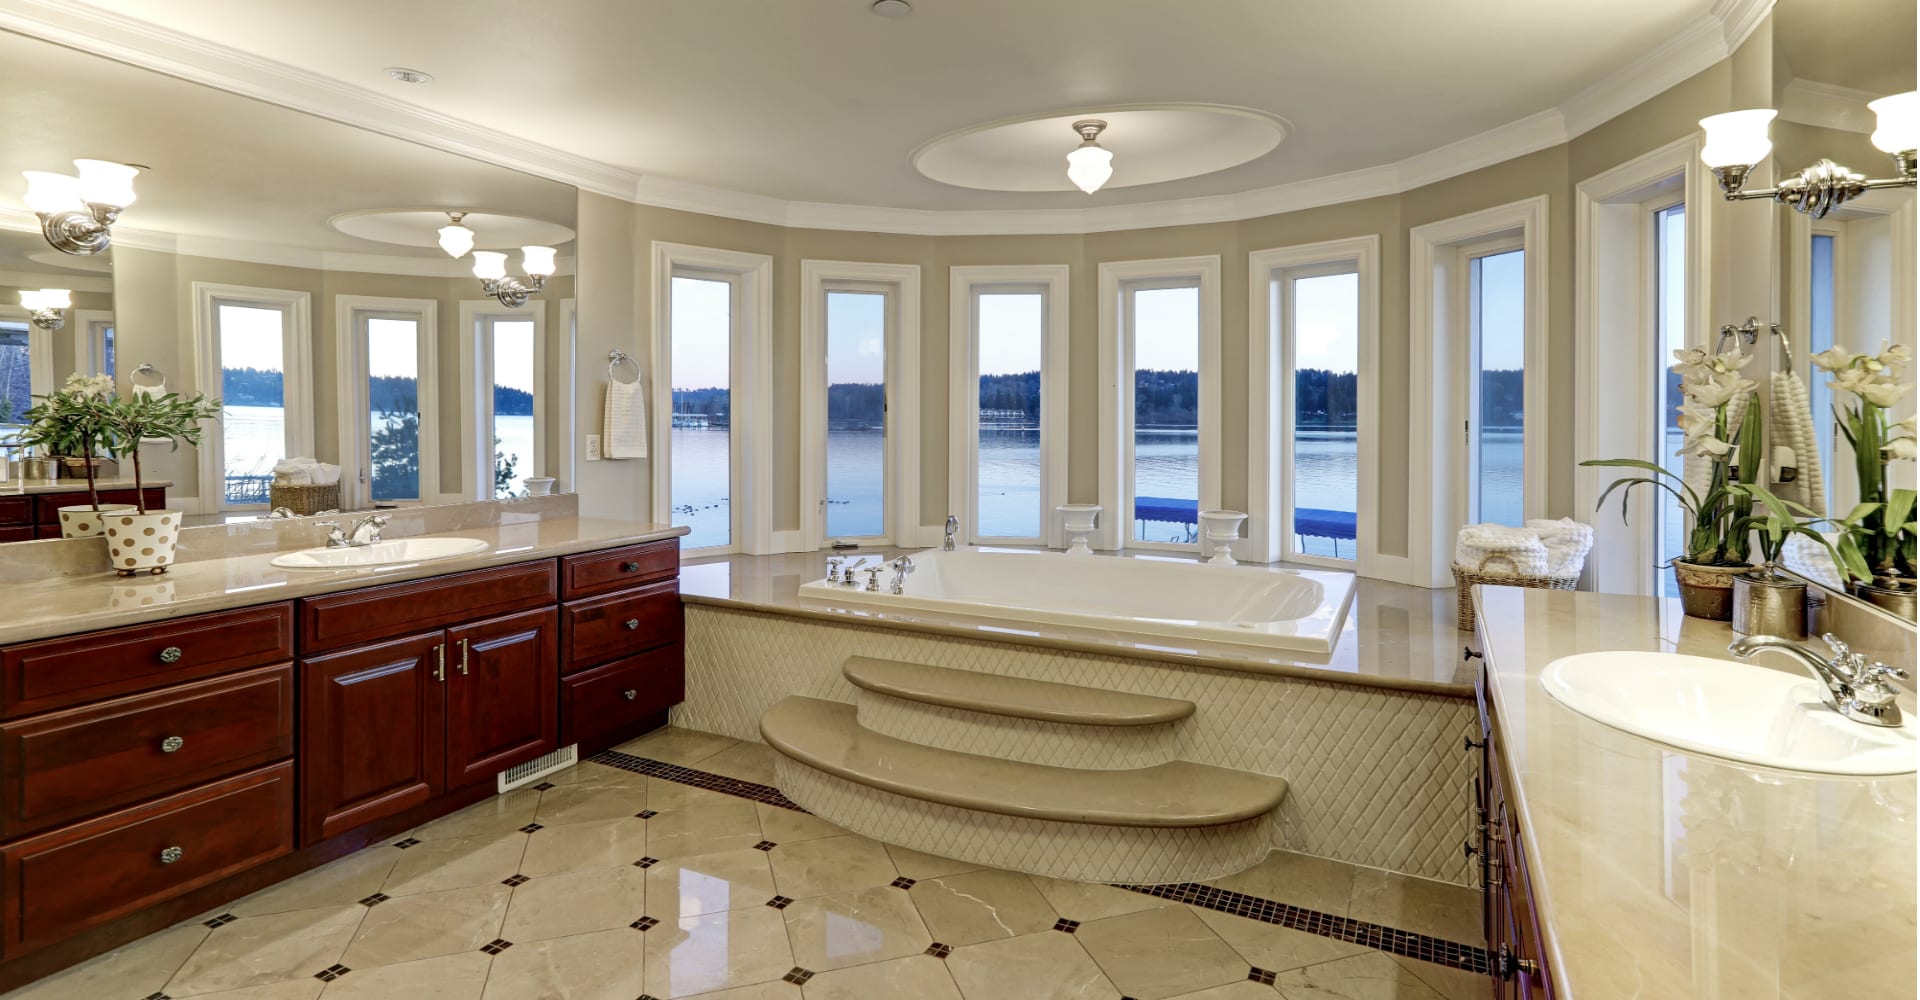 10 Tips for Hiring a Bathroom Remodeling Contractor